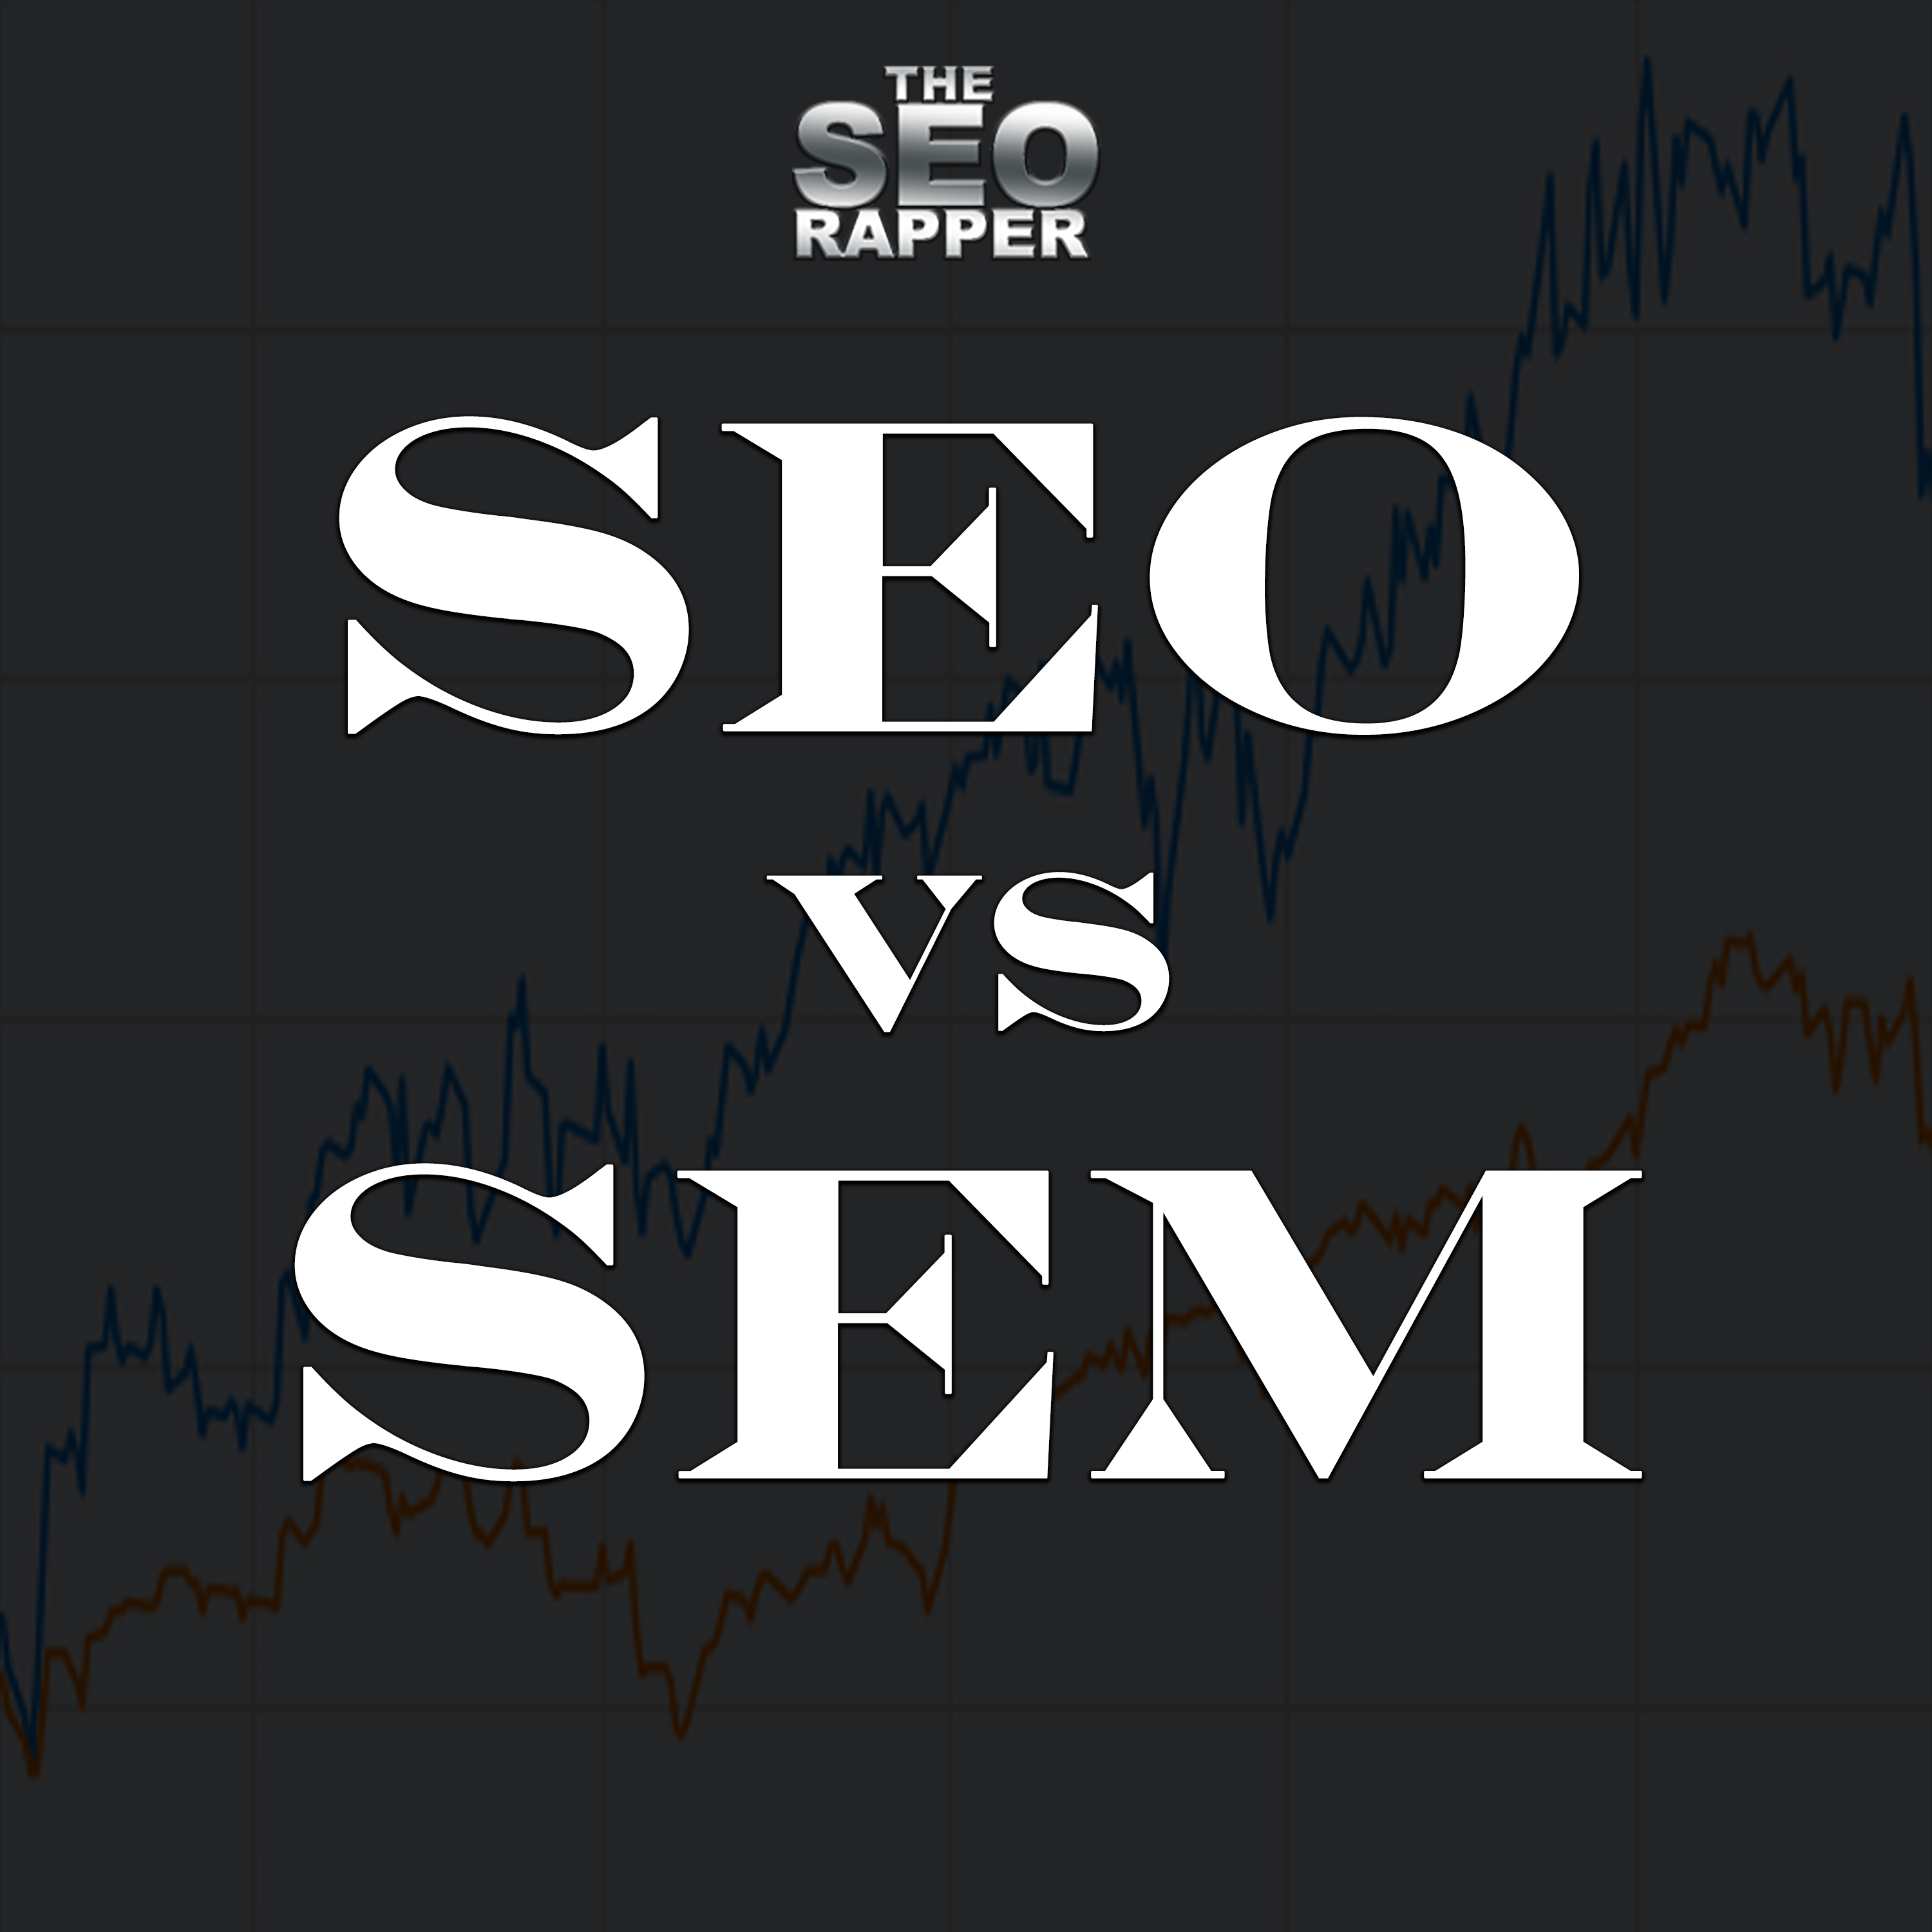 SEO vs SEM is the latest song from The SEO Rapper.